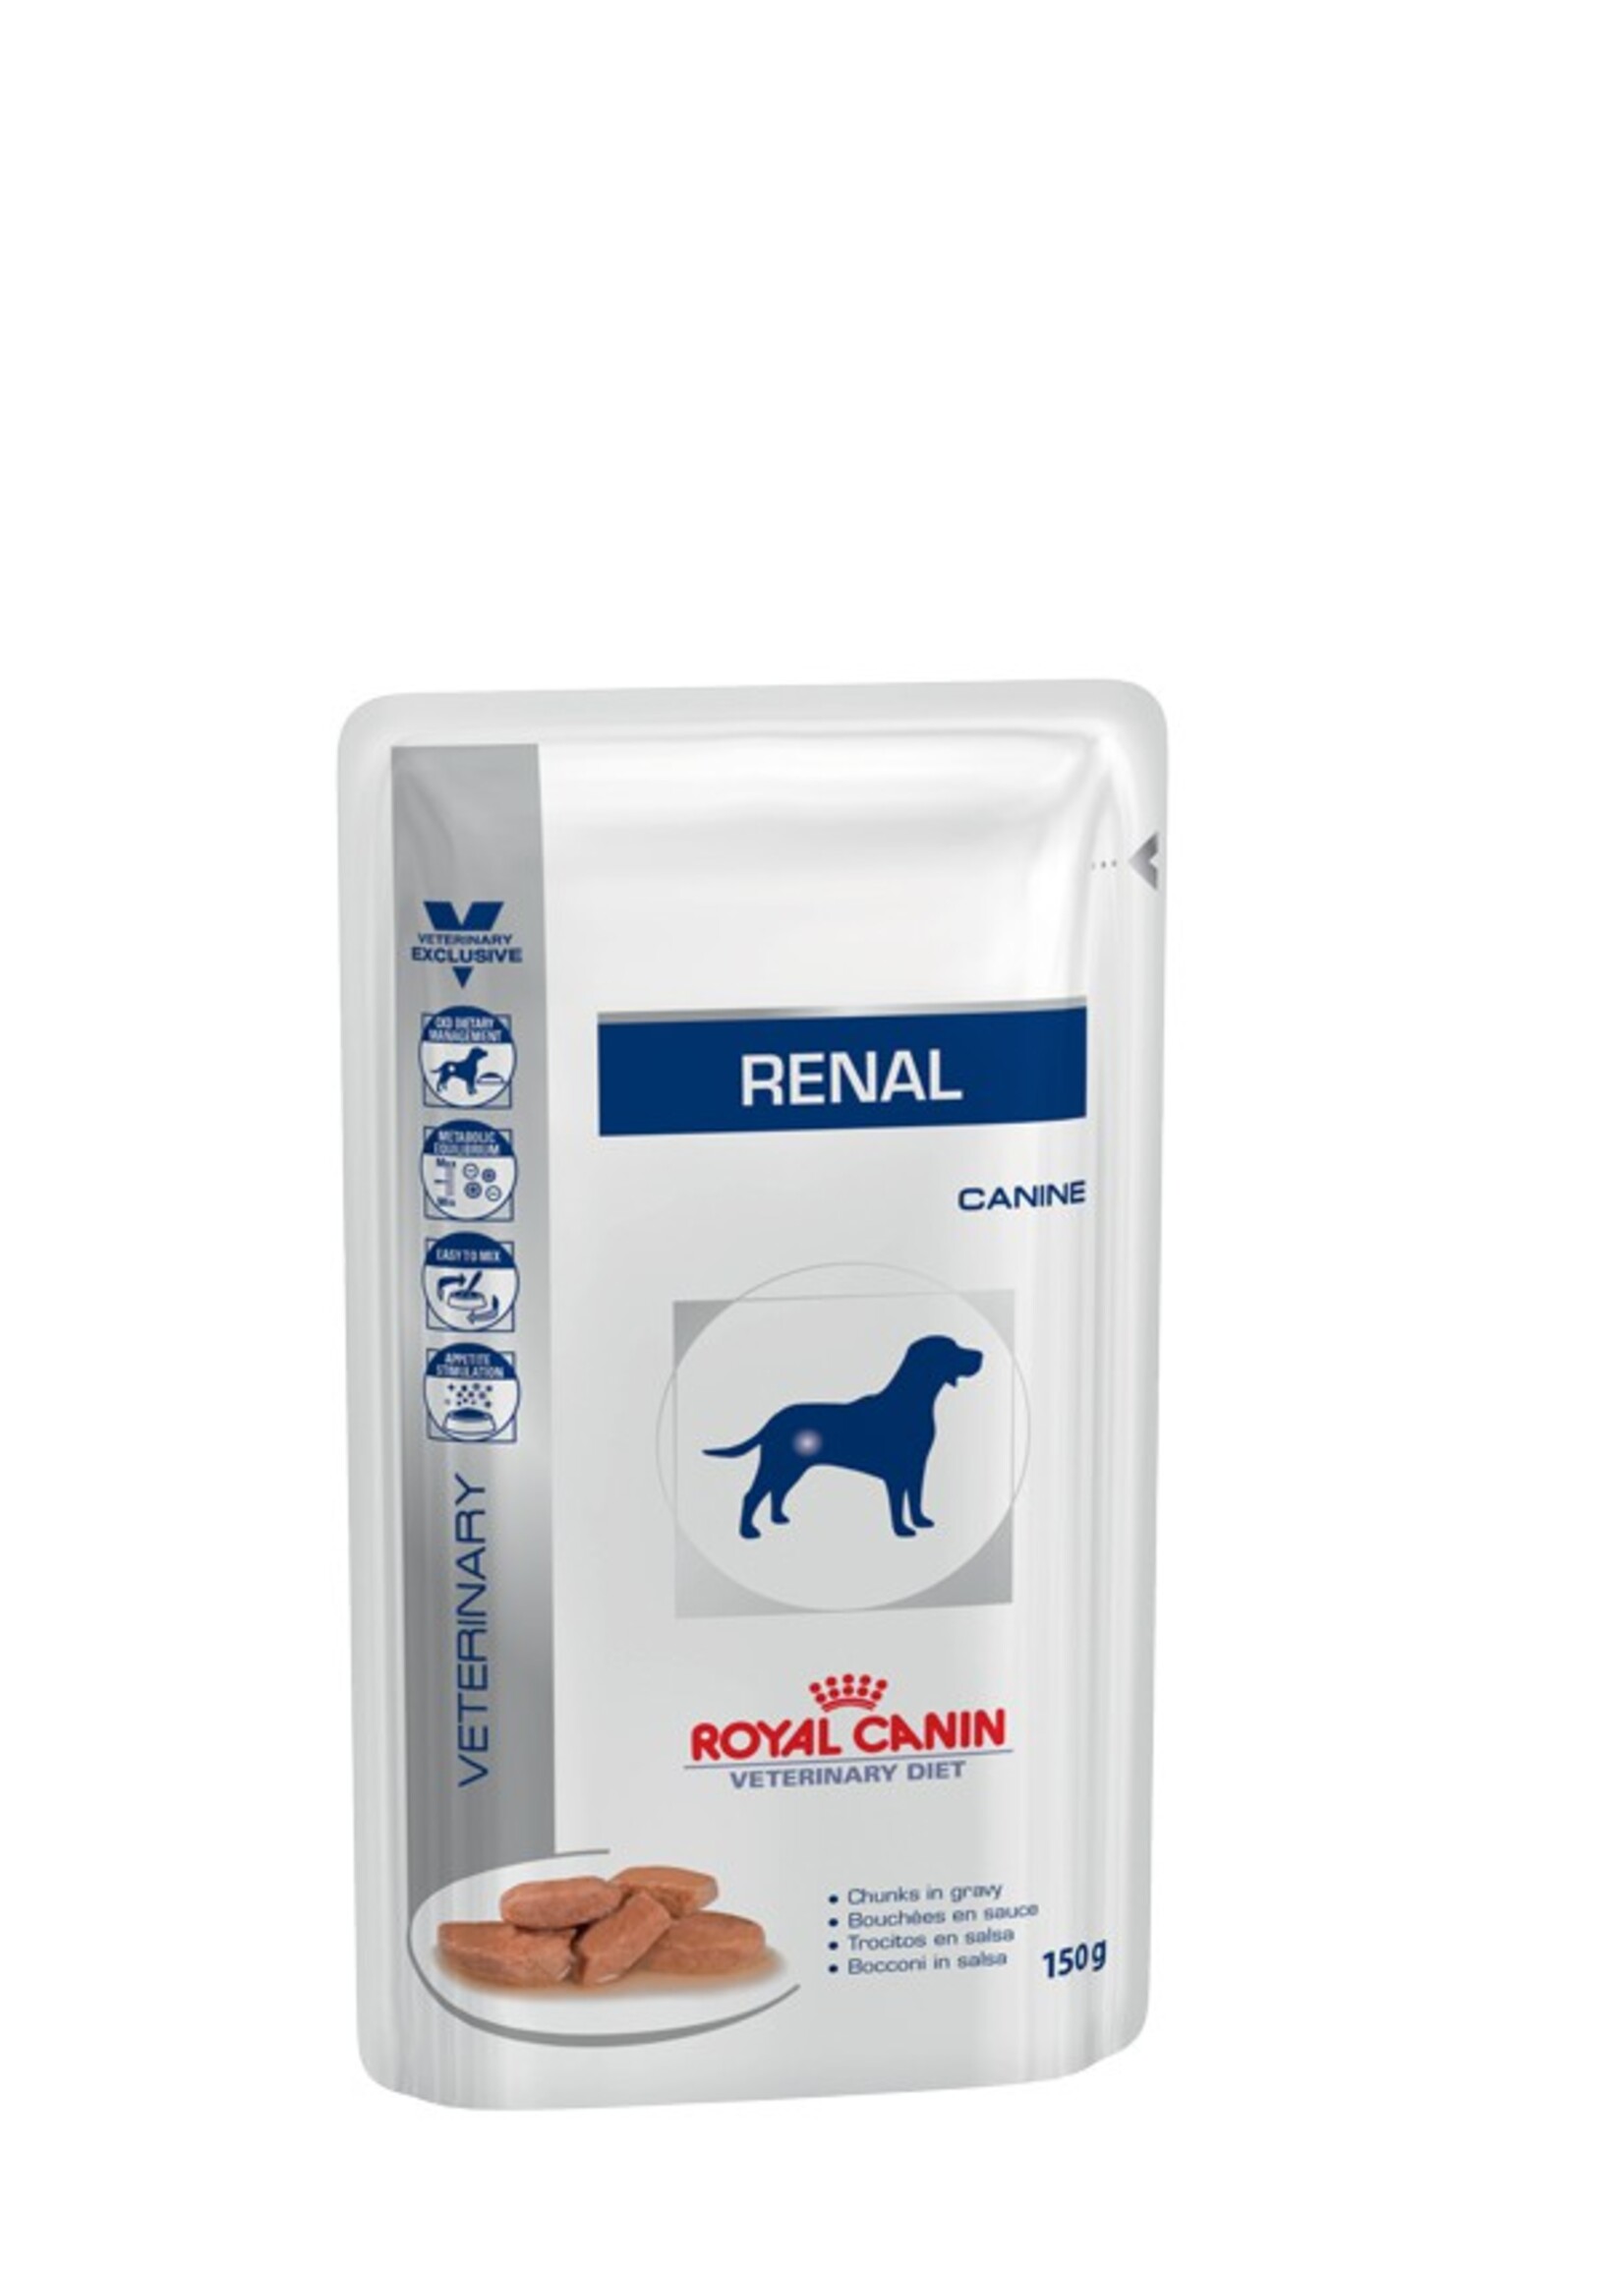 Royal Canin Vdiet Canine Renal Cig Pouch 10x150g